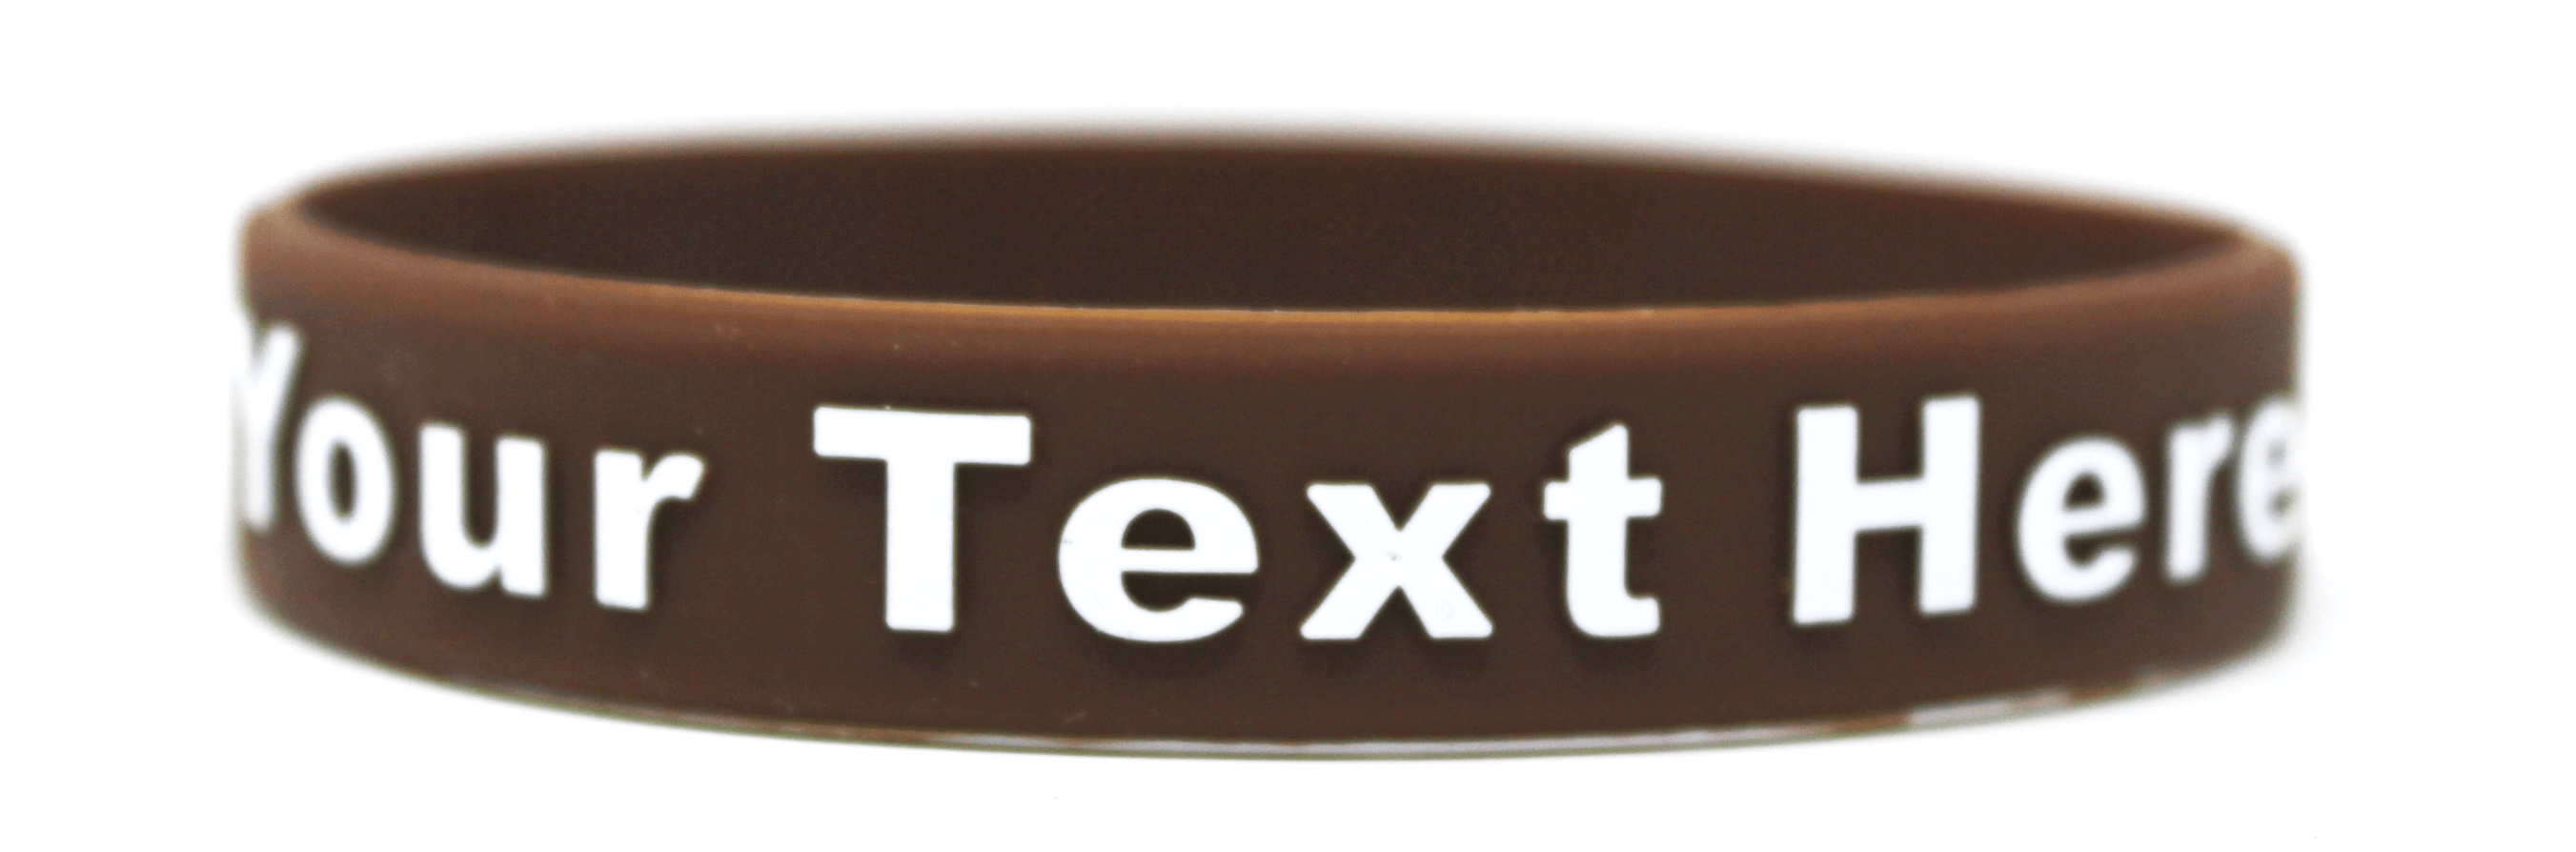 Brown wristbands represents anti-smoking and colorectal cancer.